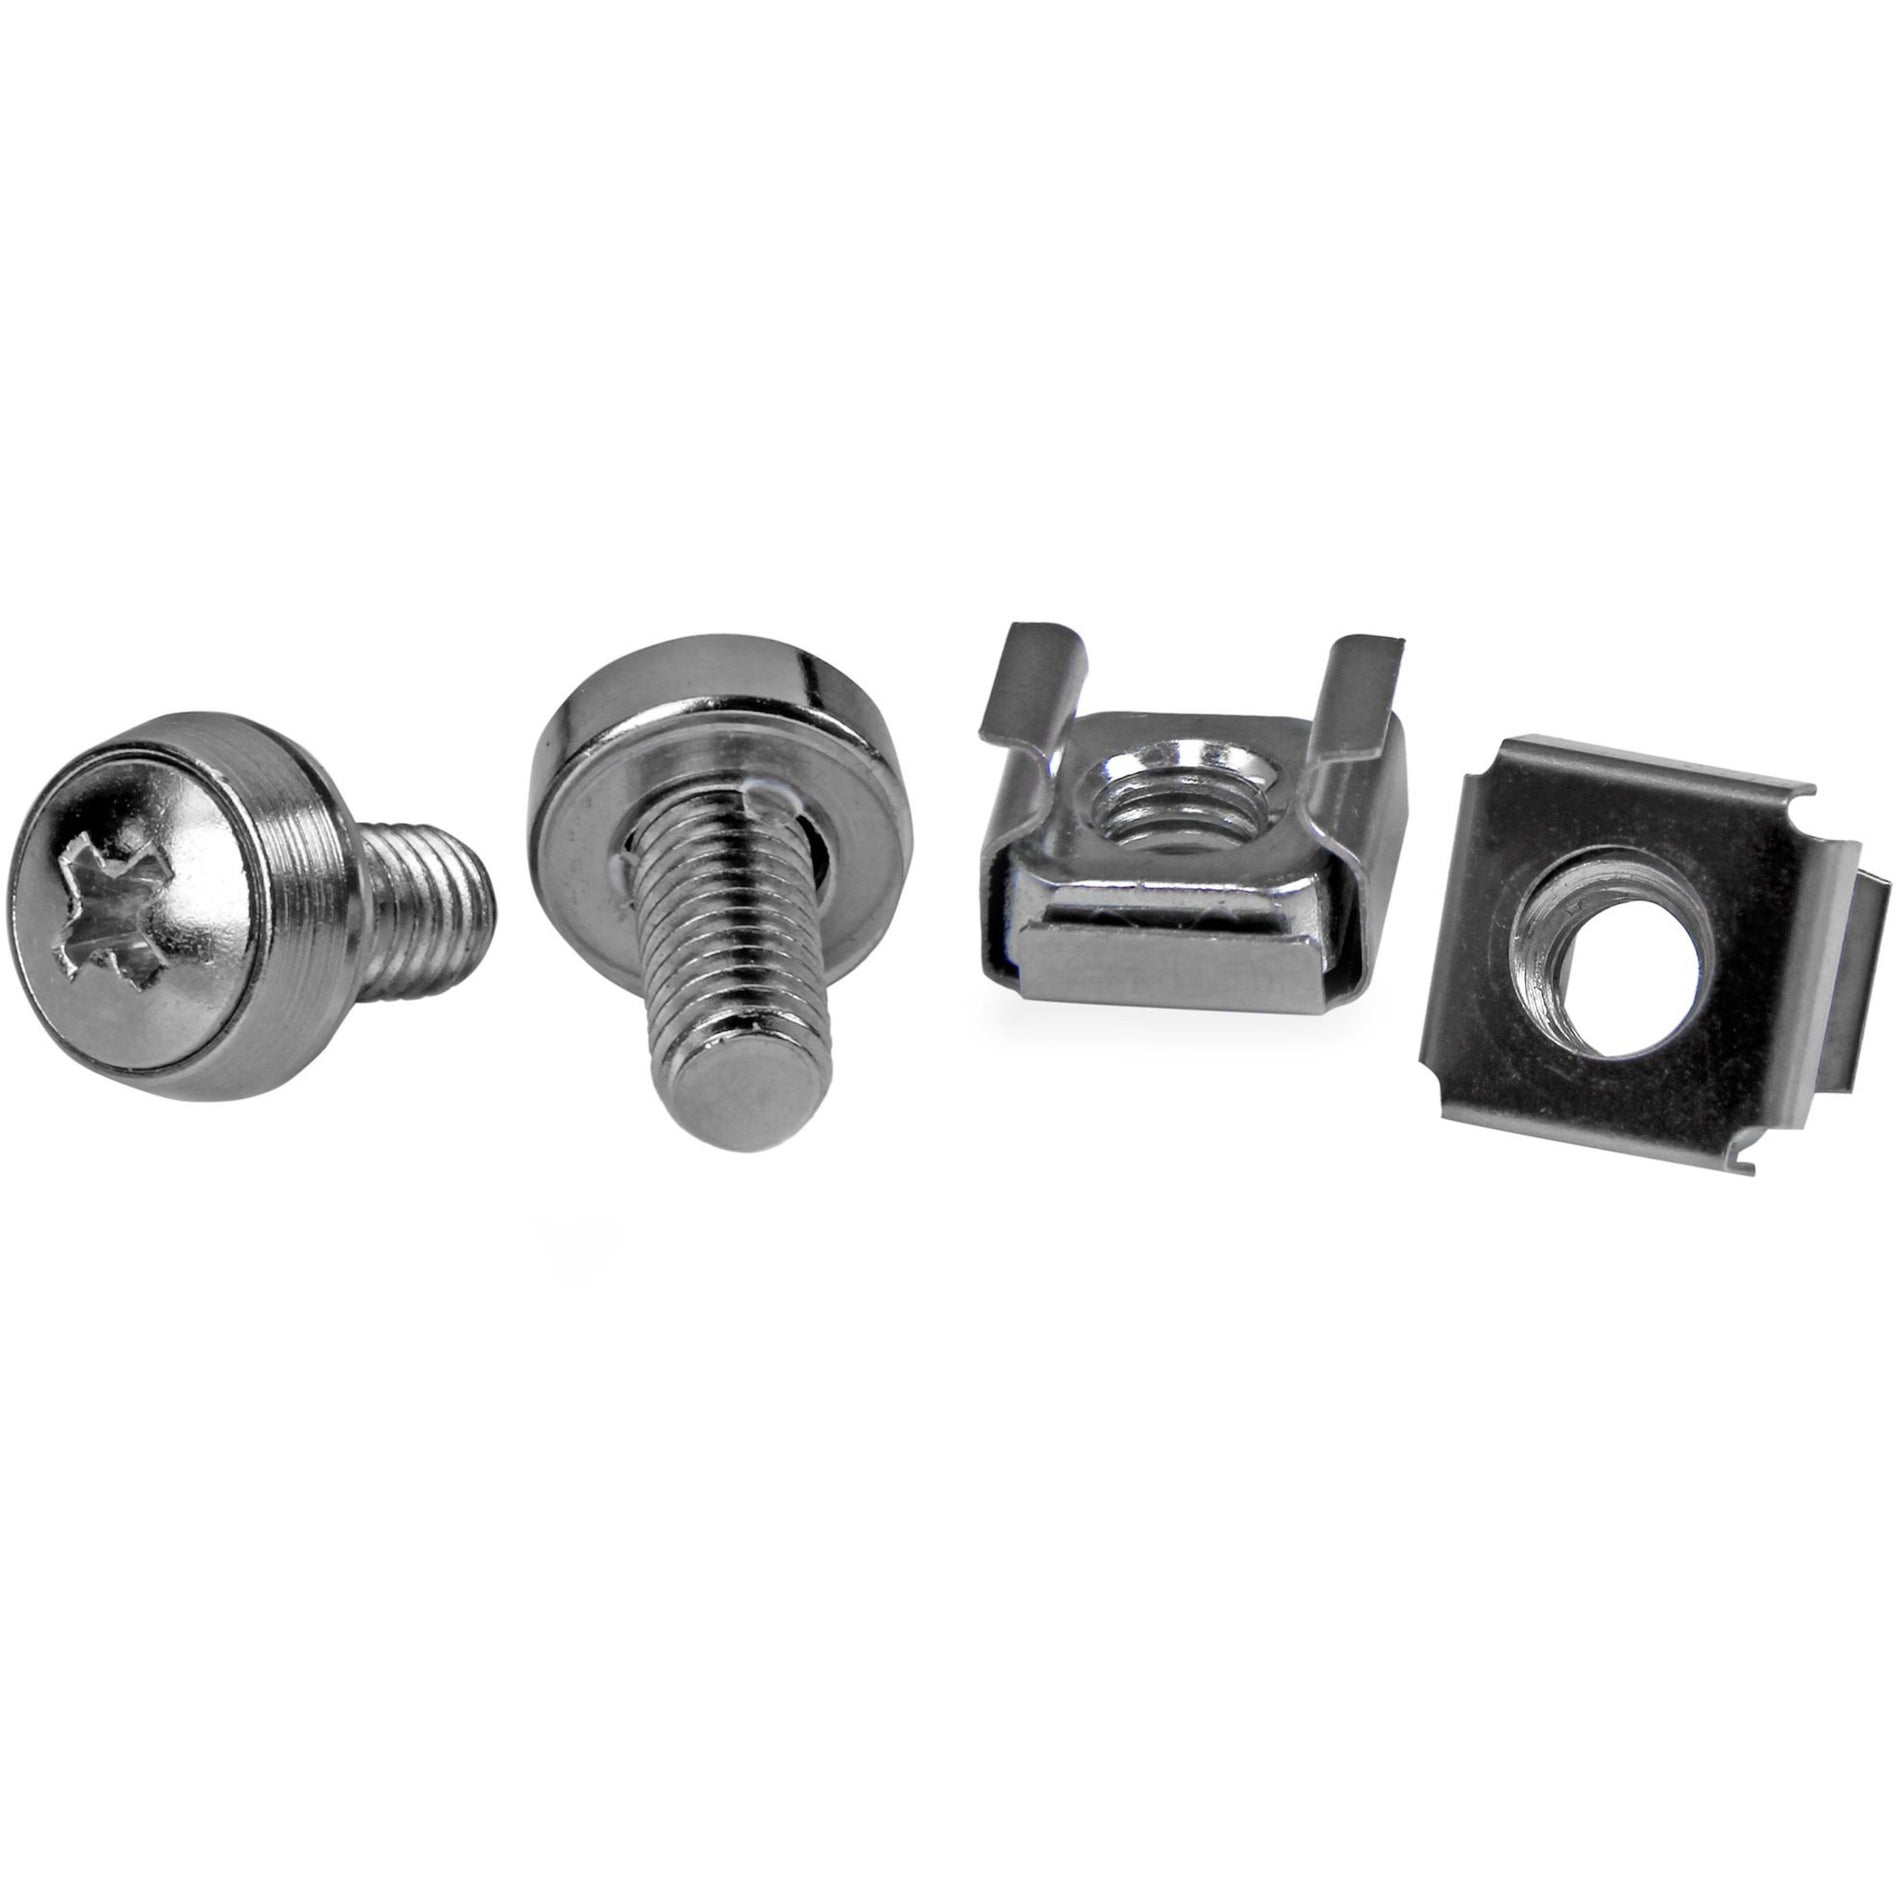 StarTech.com CABSCREWM6 50 Pkg M6 Mounting Screws and Cage Nuts for Server Rack Cabinet, Rust Resistant, Nickel Plated